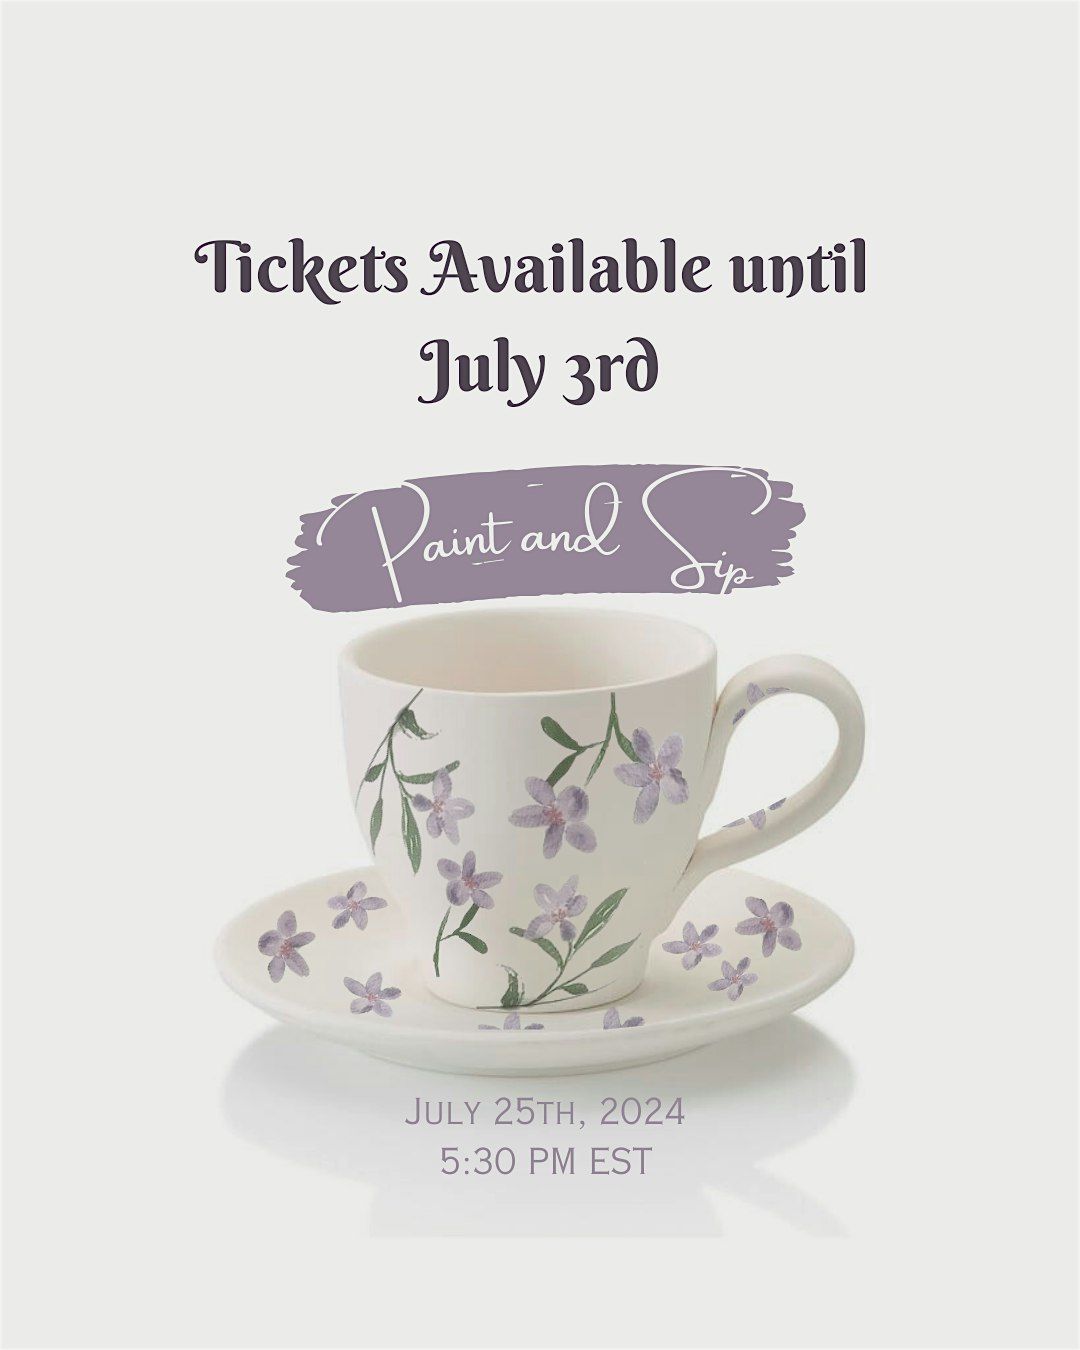 Paint and Sip: Ceramic Tea Cup Painting and Afternoon Tea